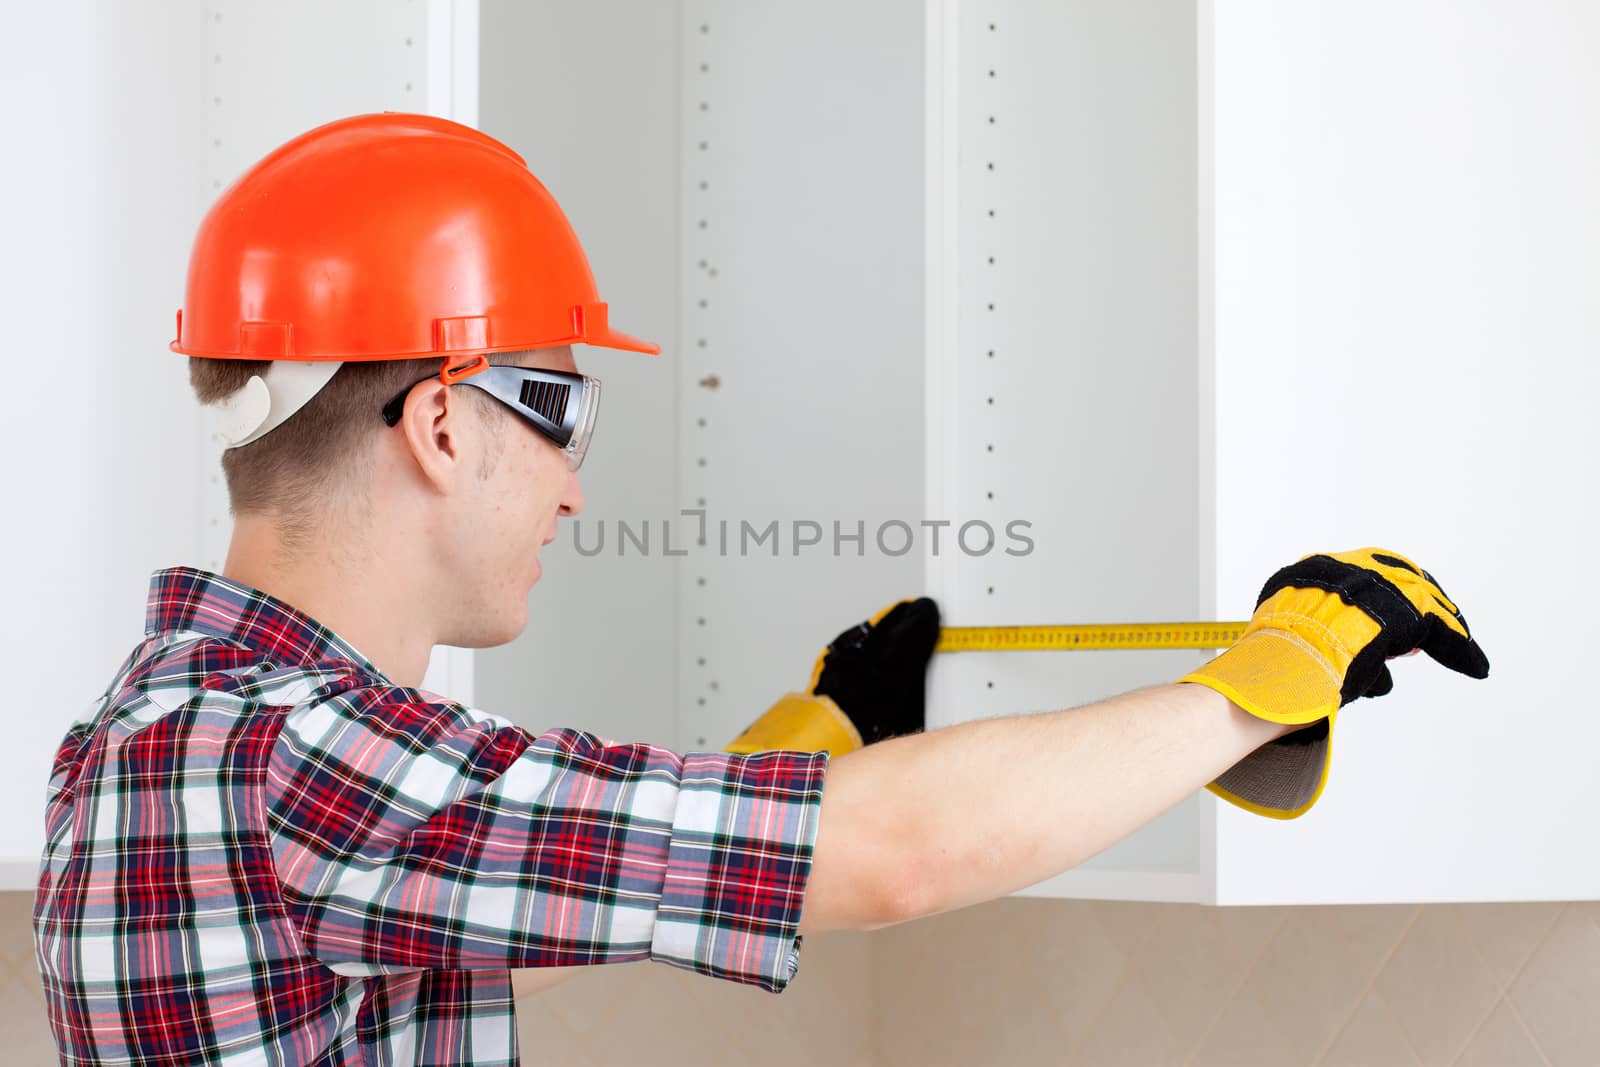 builder measures the length of the tape measure